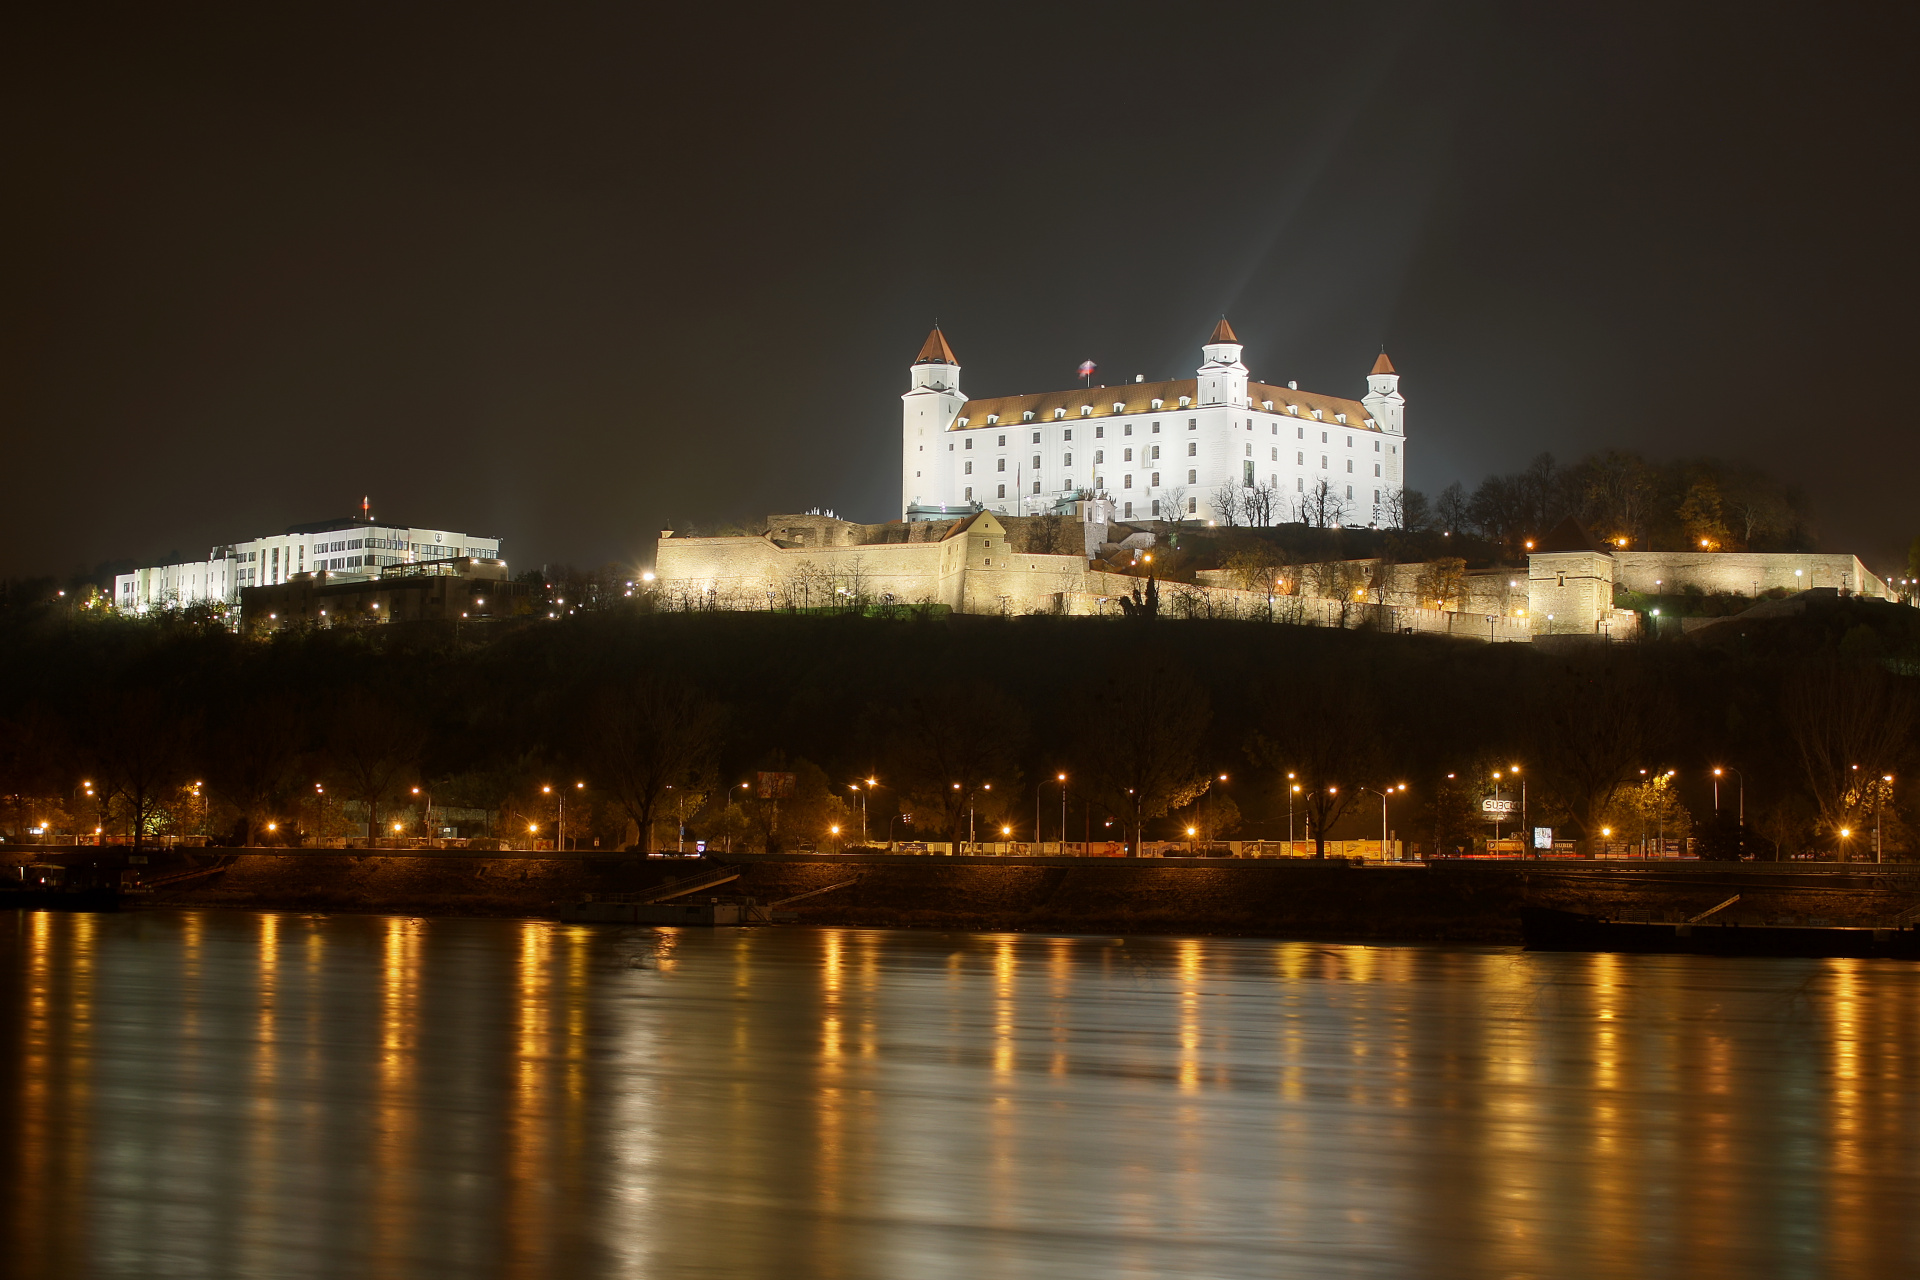 Bratislava Castle and National Council Building (Travels » Bratislava » The City At Night)